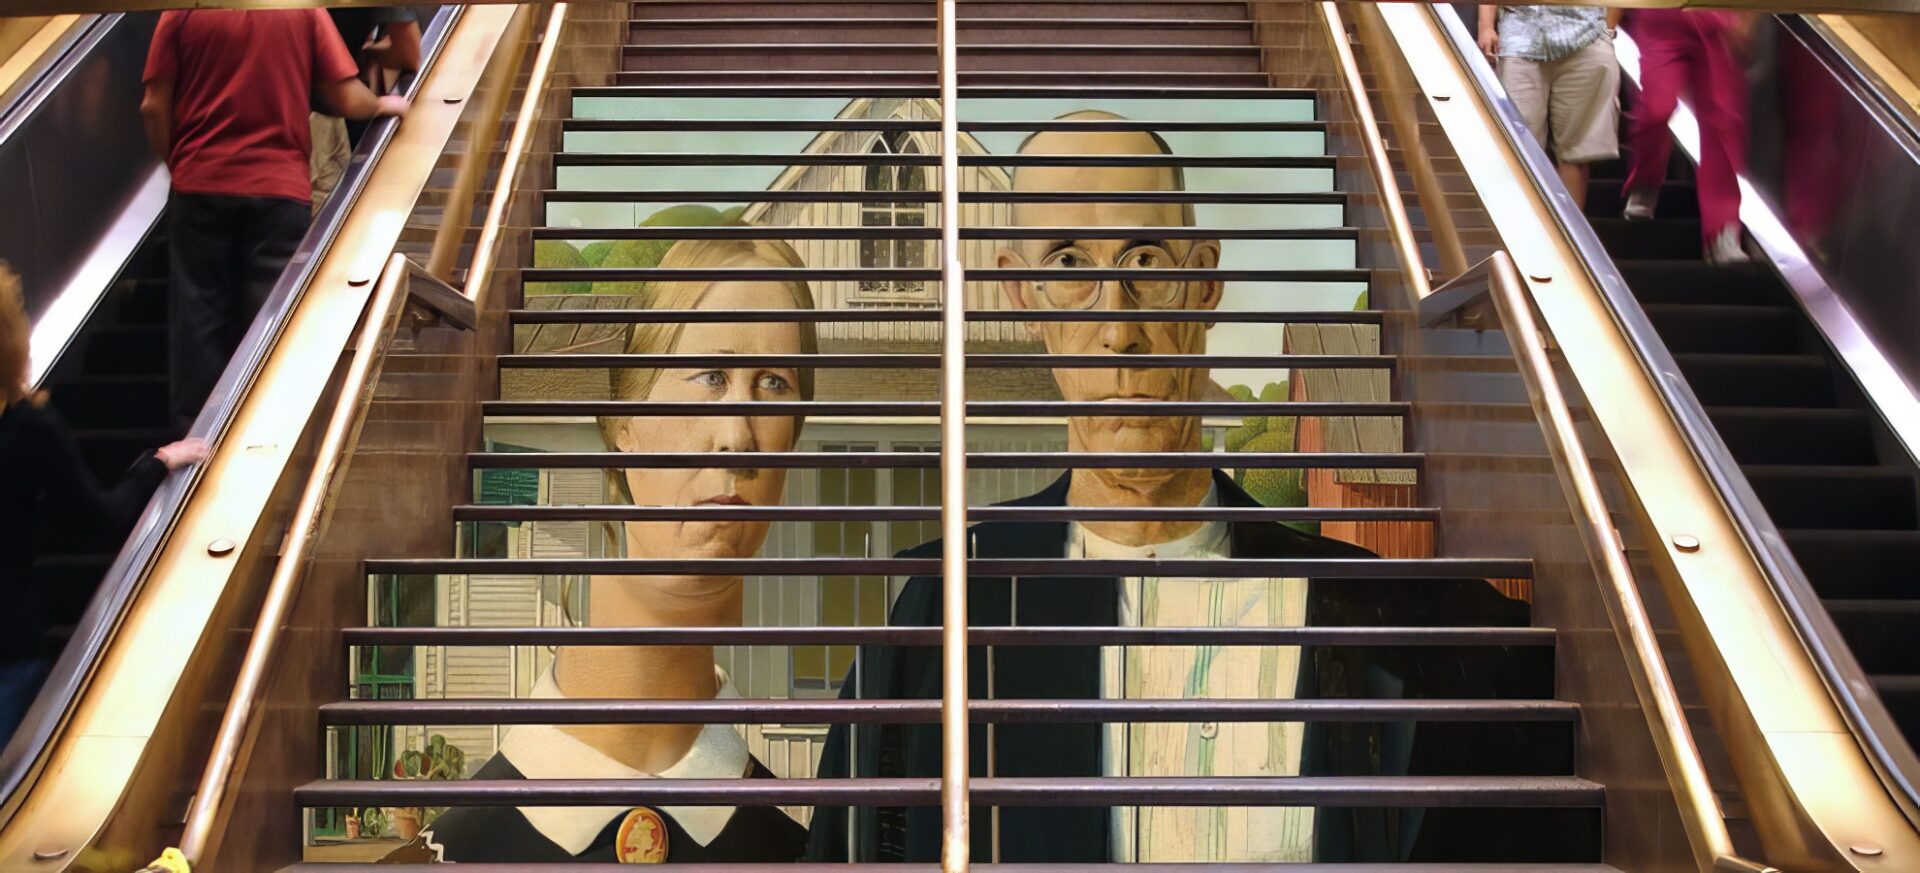 American Gothic applied as stair decal